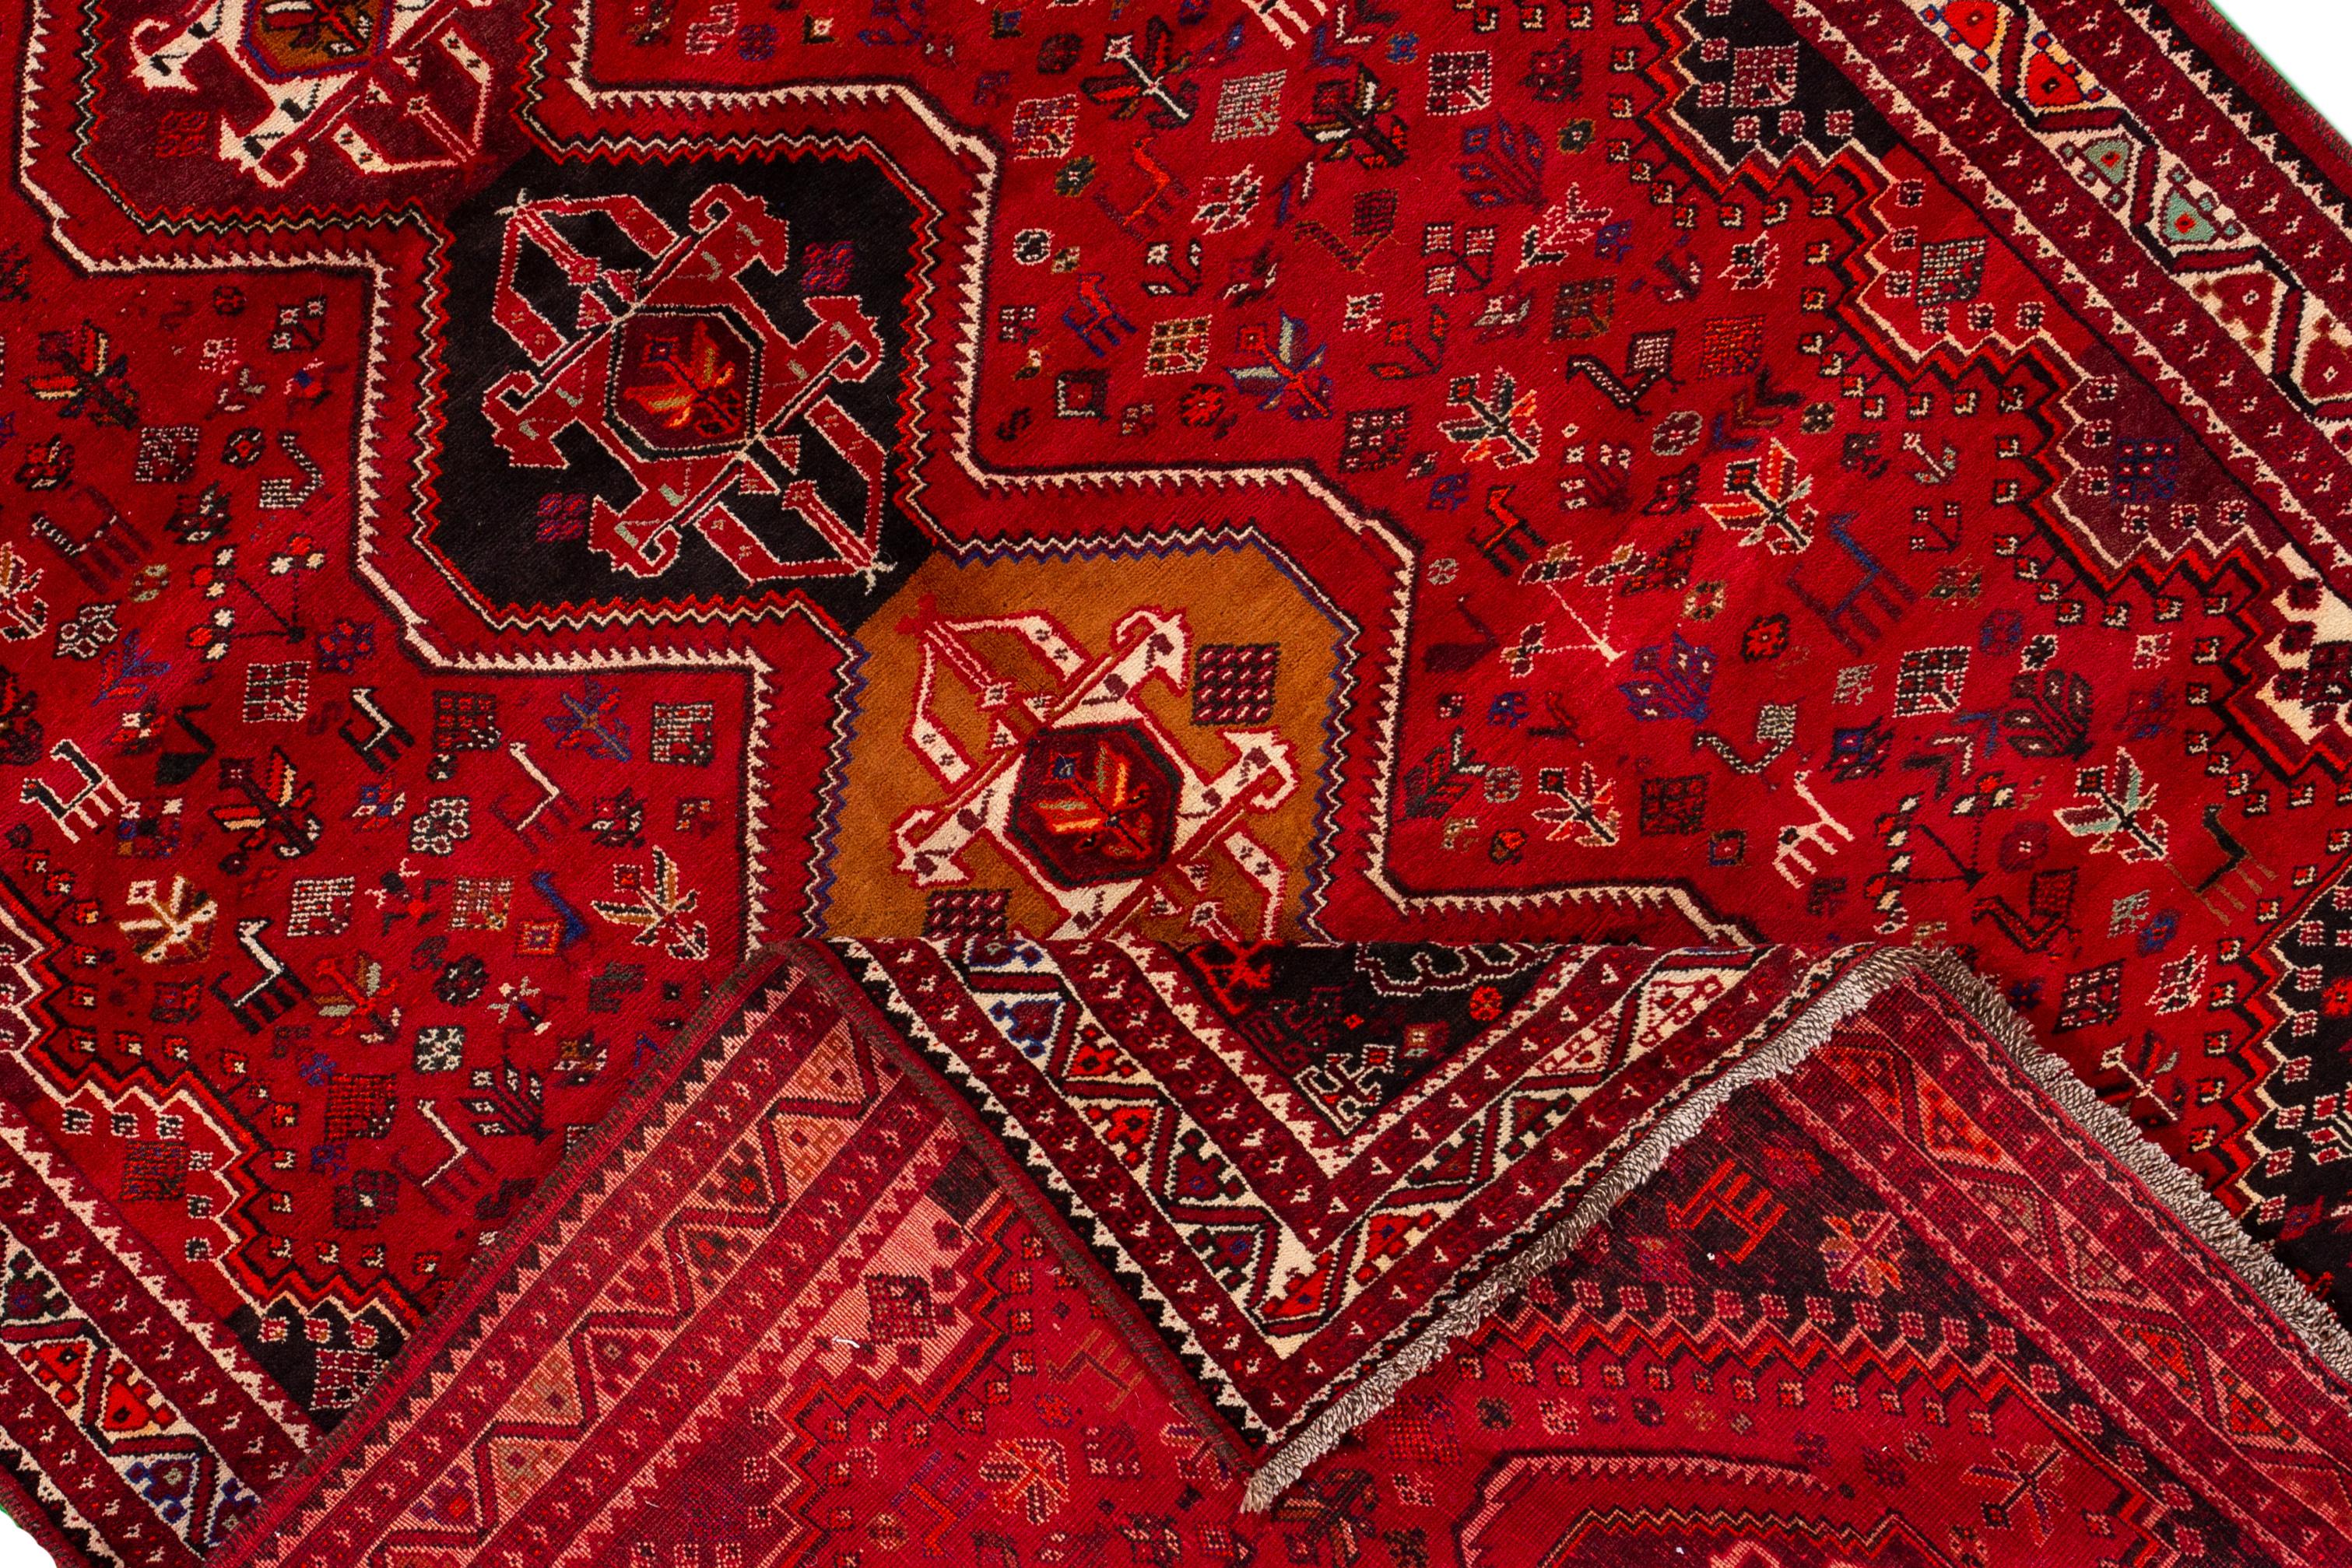 Beautiful vintage Shiraz rug, hand knotted wool with a red field, black and ivory accents, in a center multi medallion design.
This rug measures 7' 5